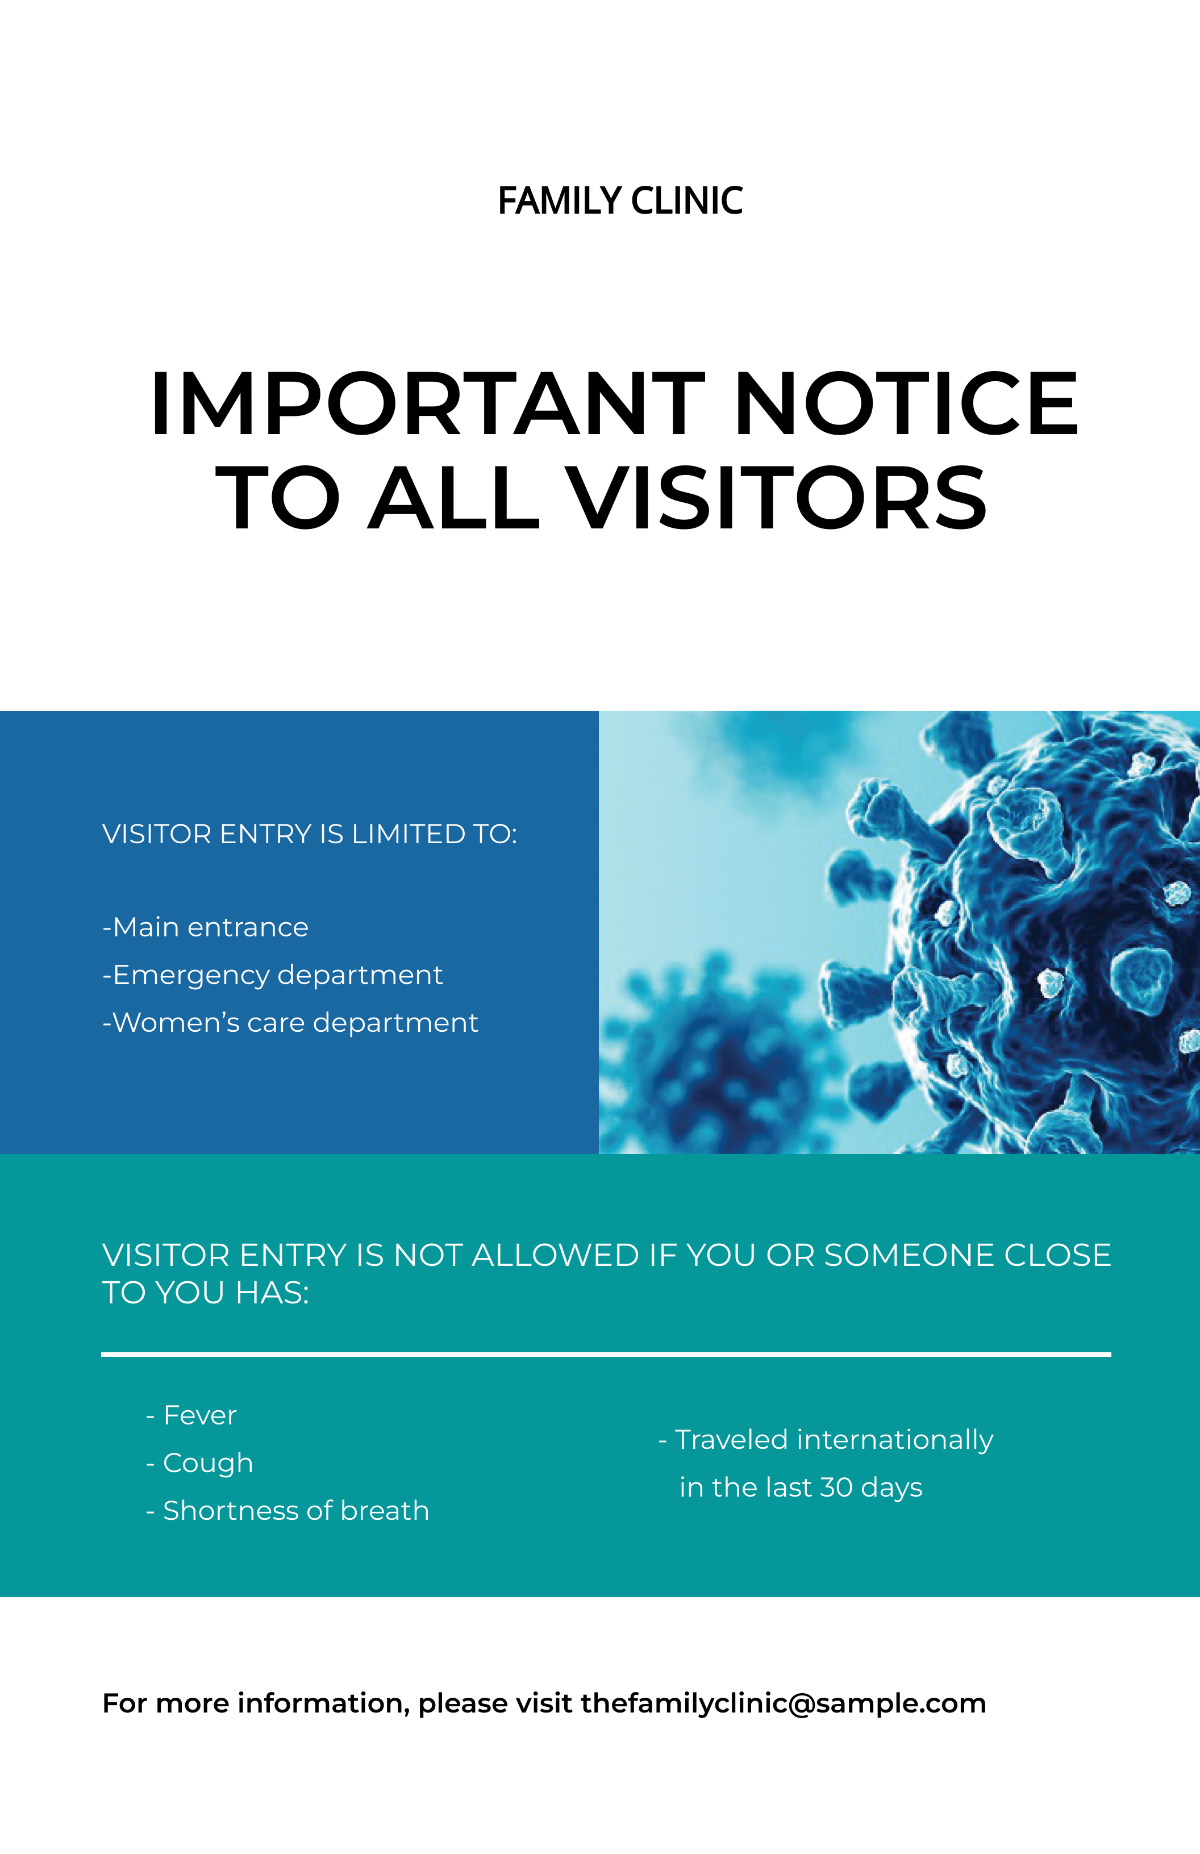 Coronavirus COVID-19 Entry Restricted Poster Template